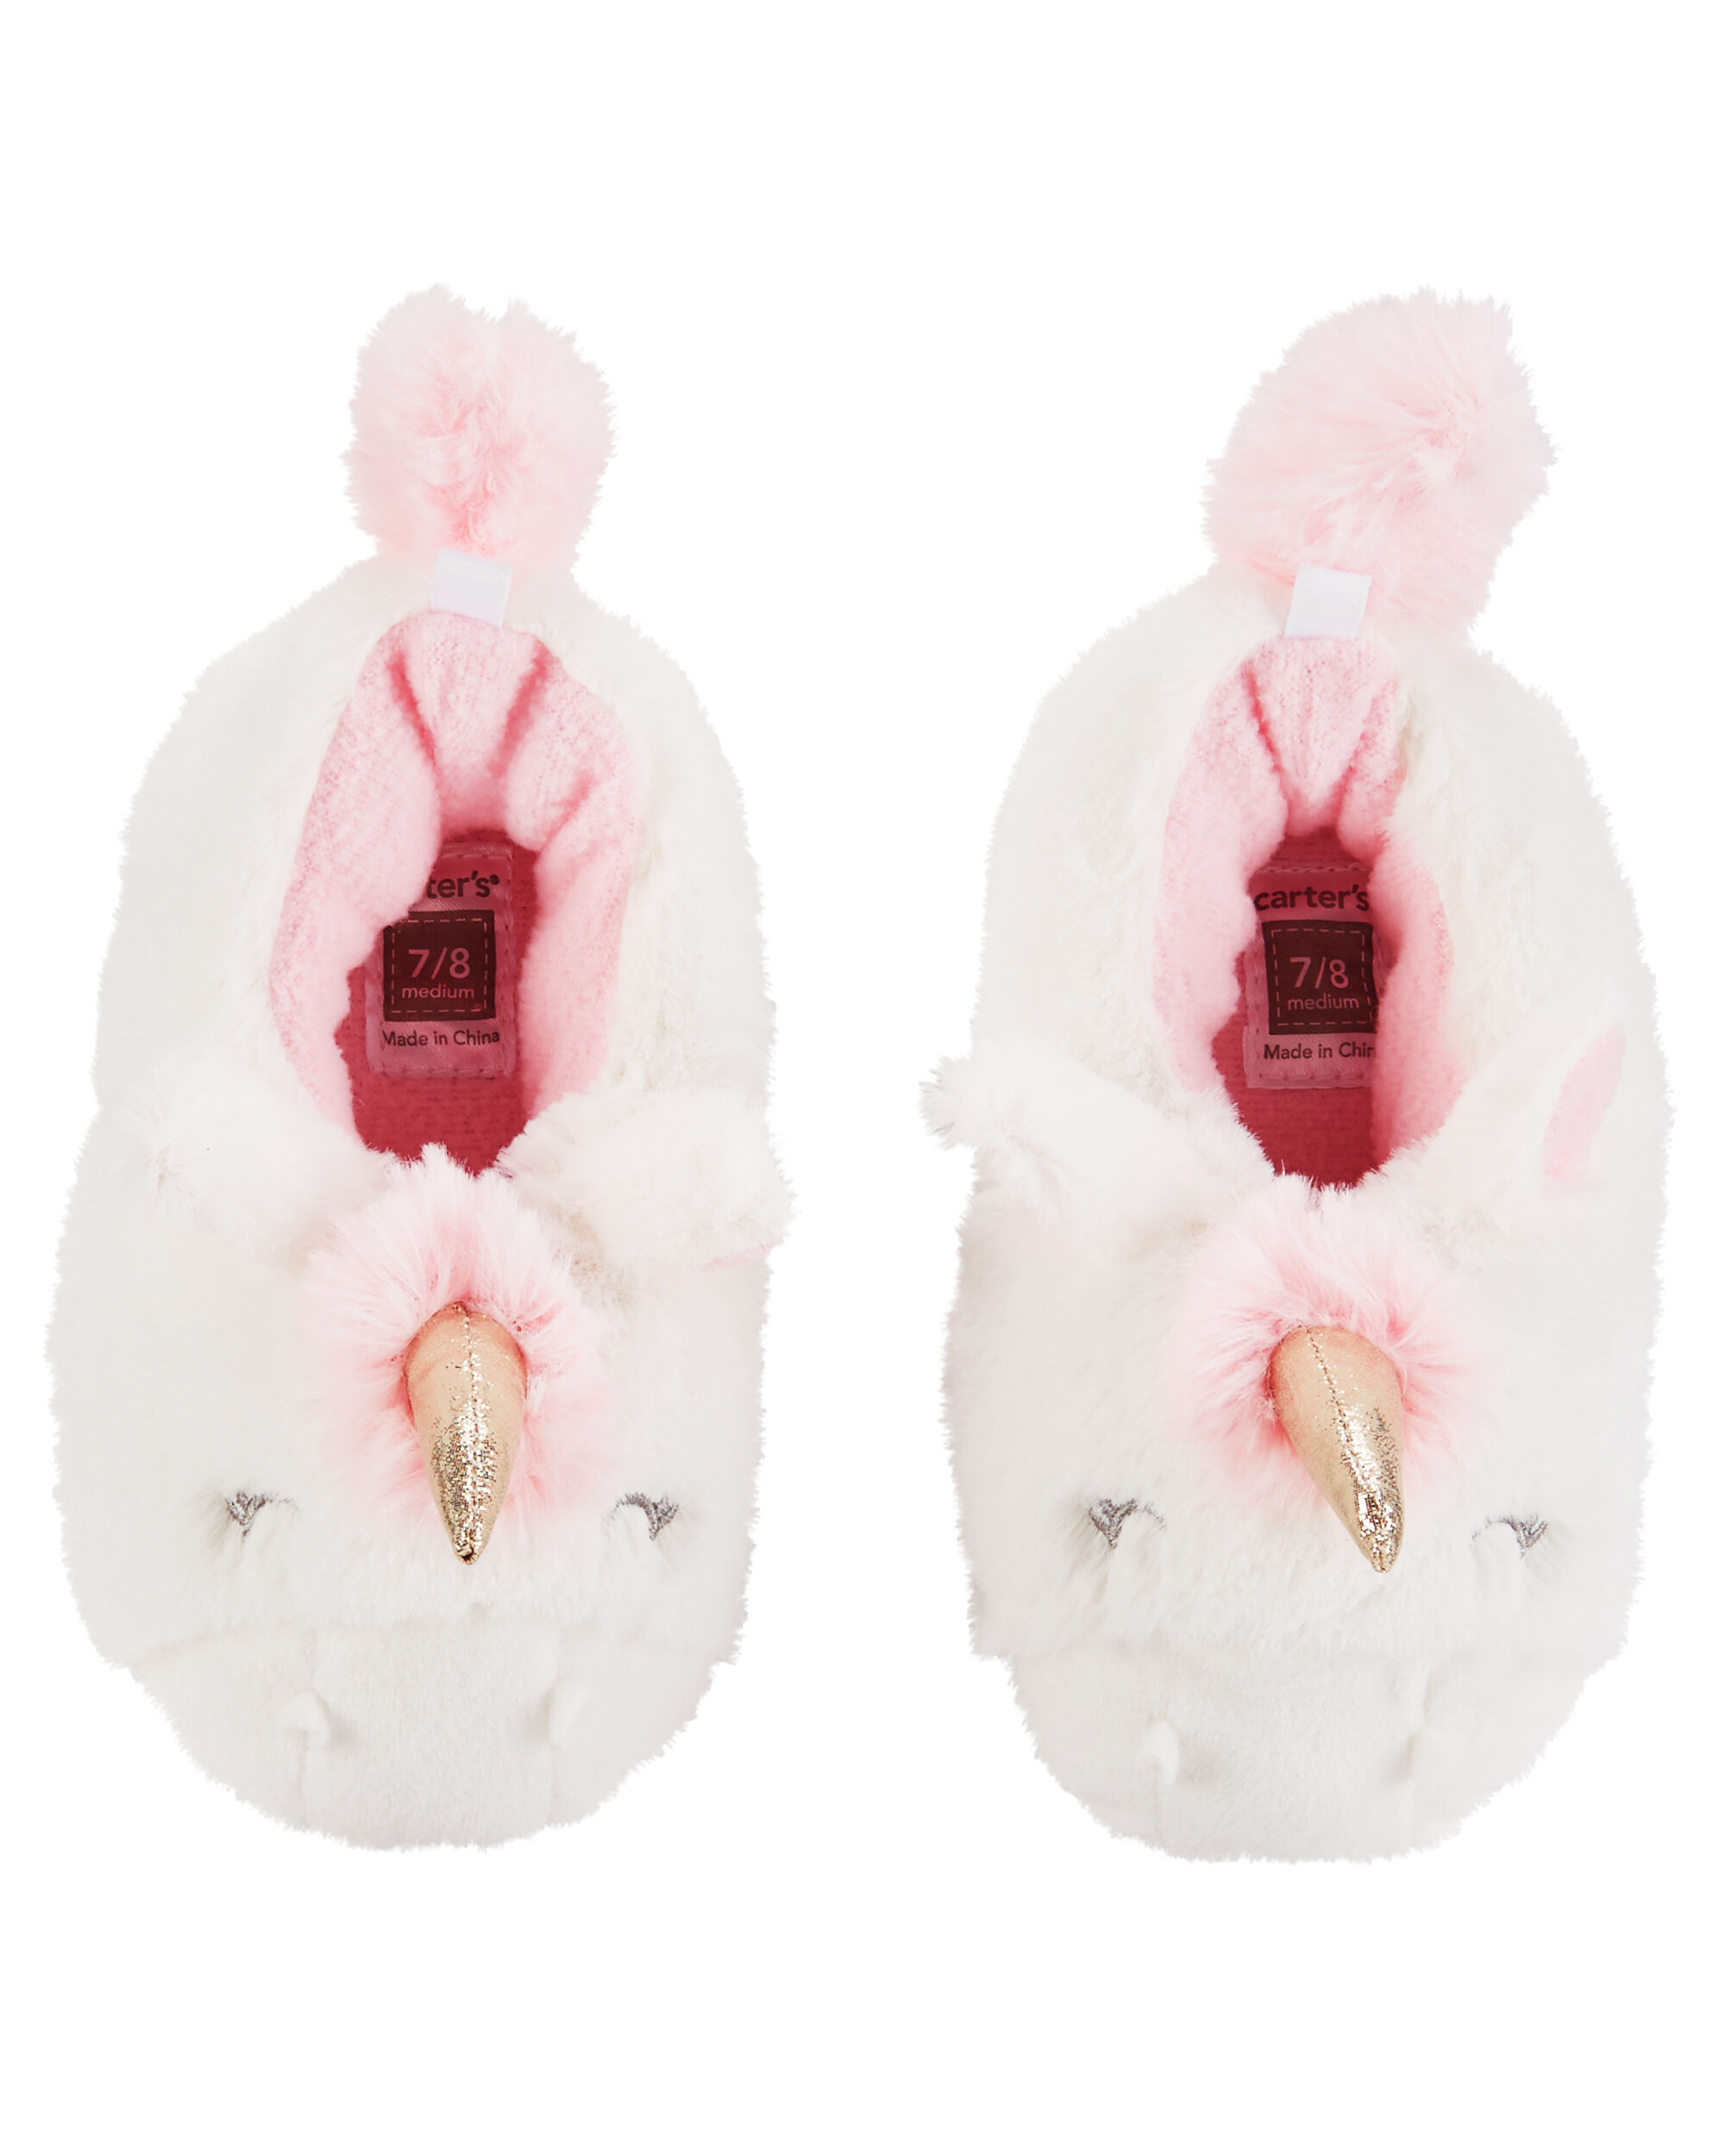 carters slippers